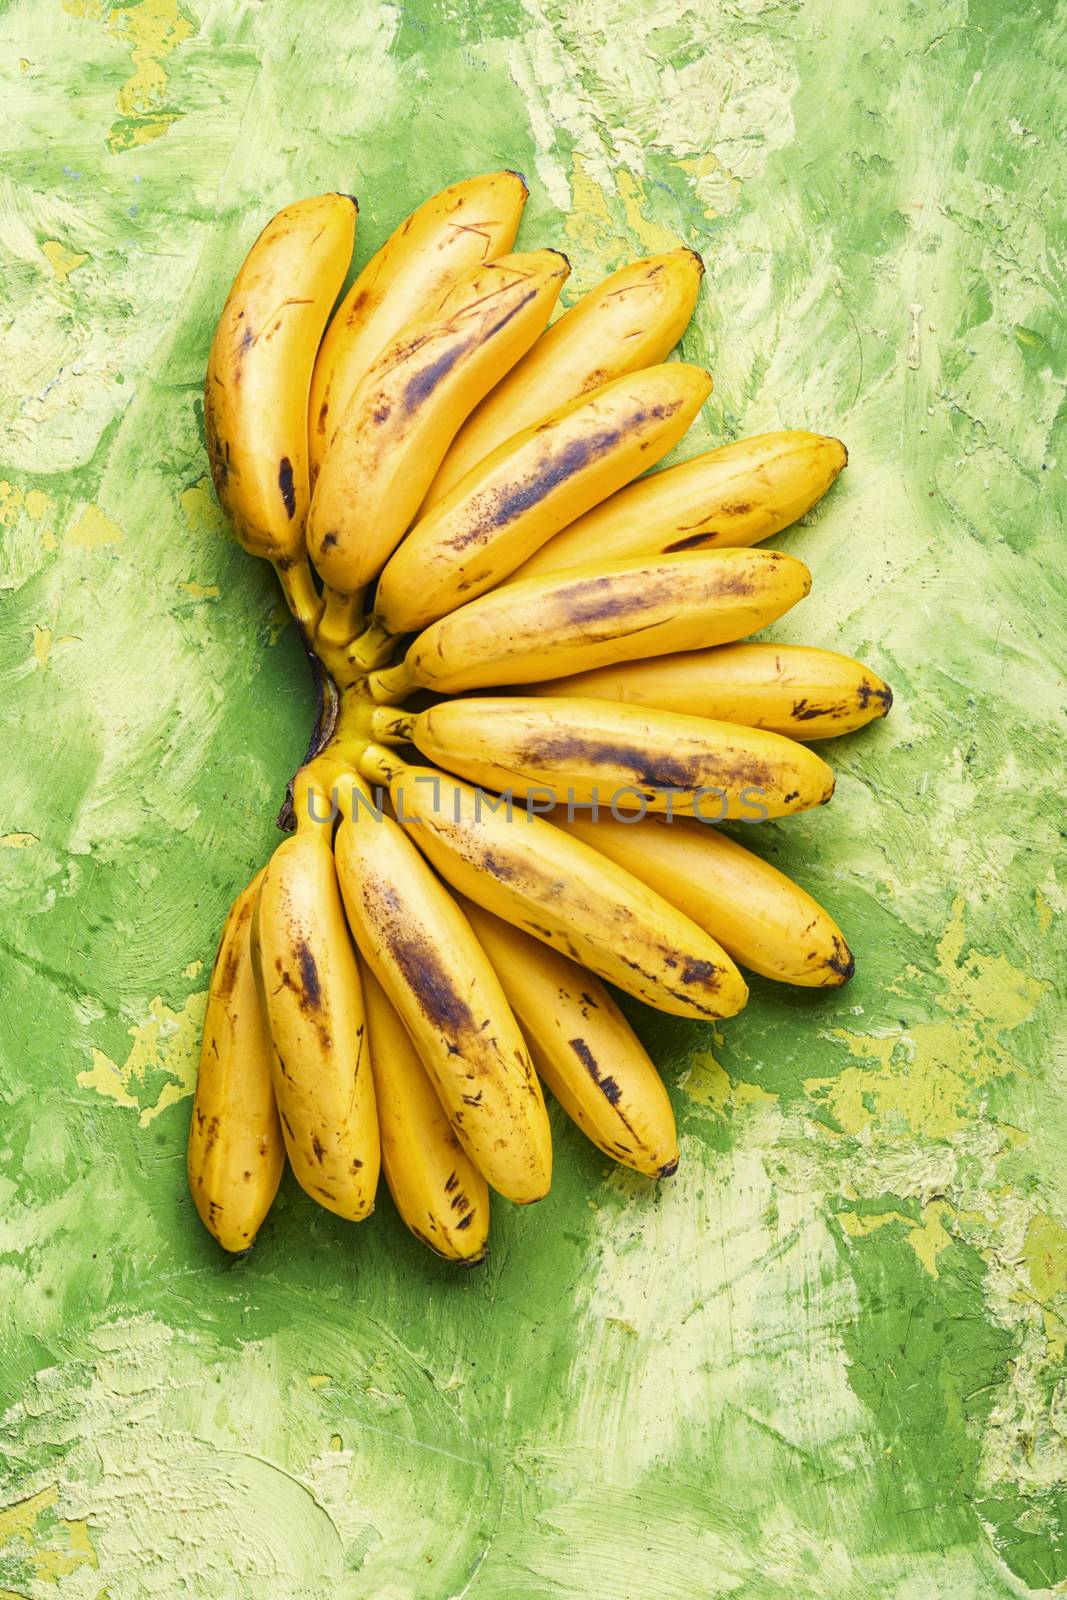 A bunch of ripe bananas on a green background